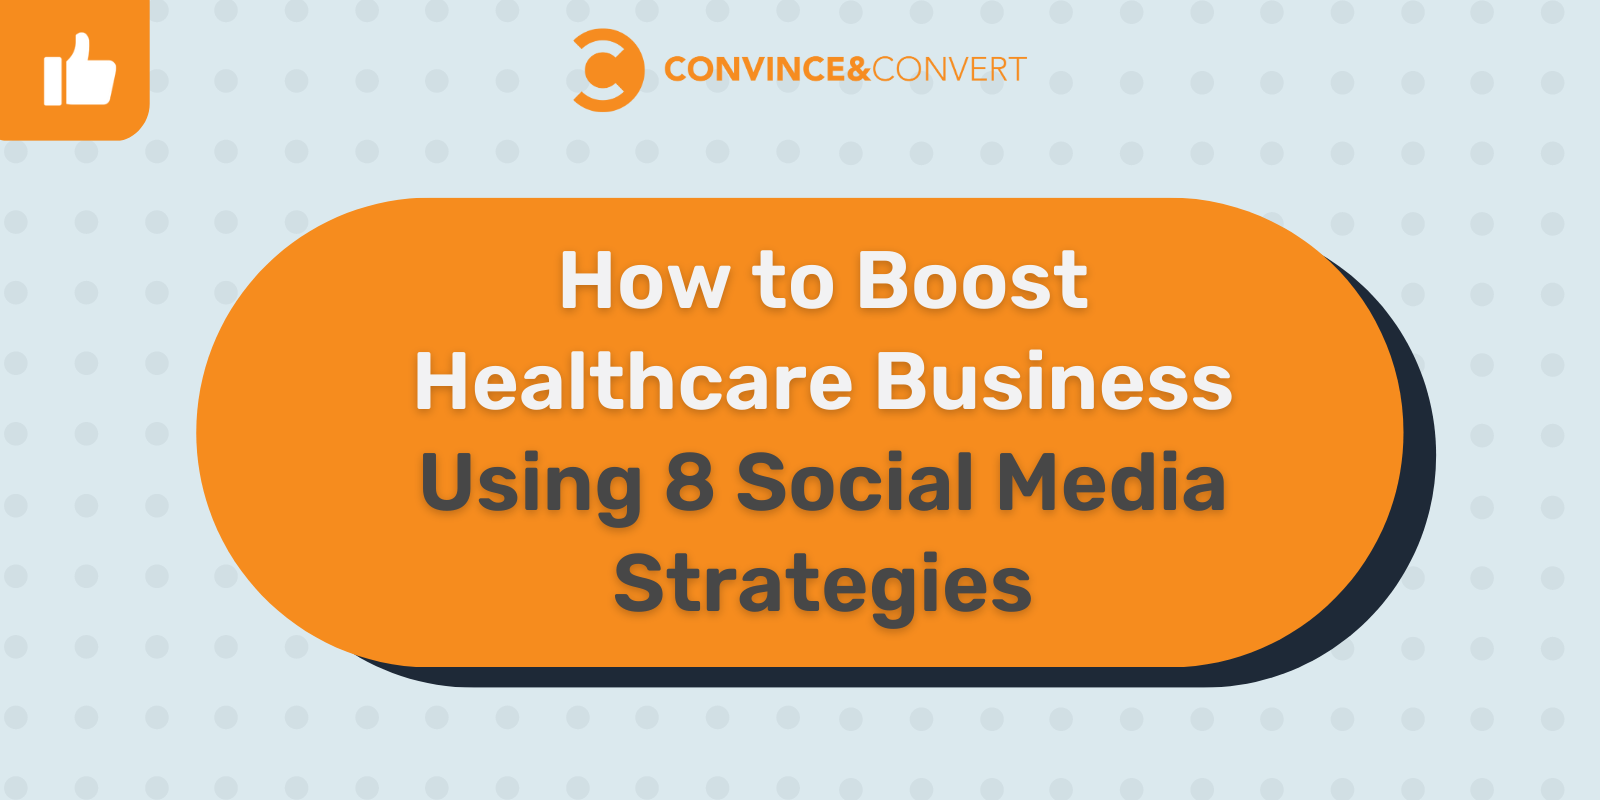 You are currently viewing How to Boost Healthcare Business Using 8 Social Media Strategies